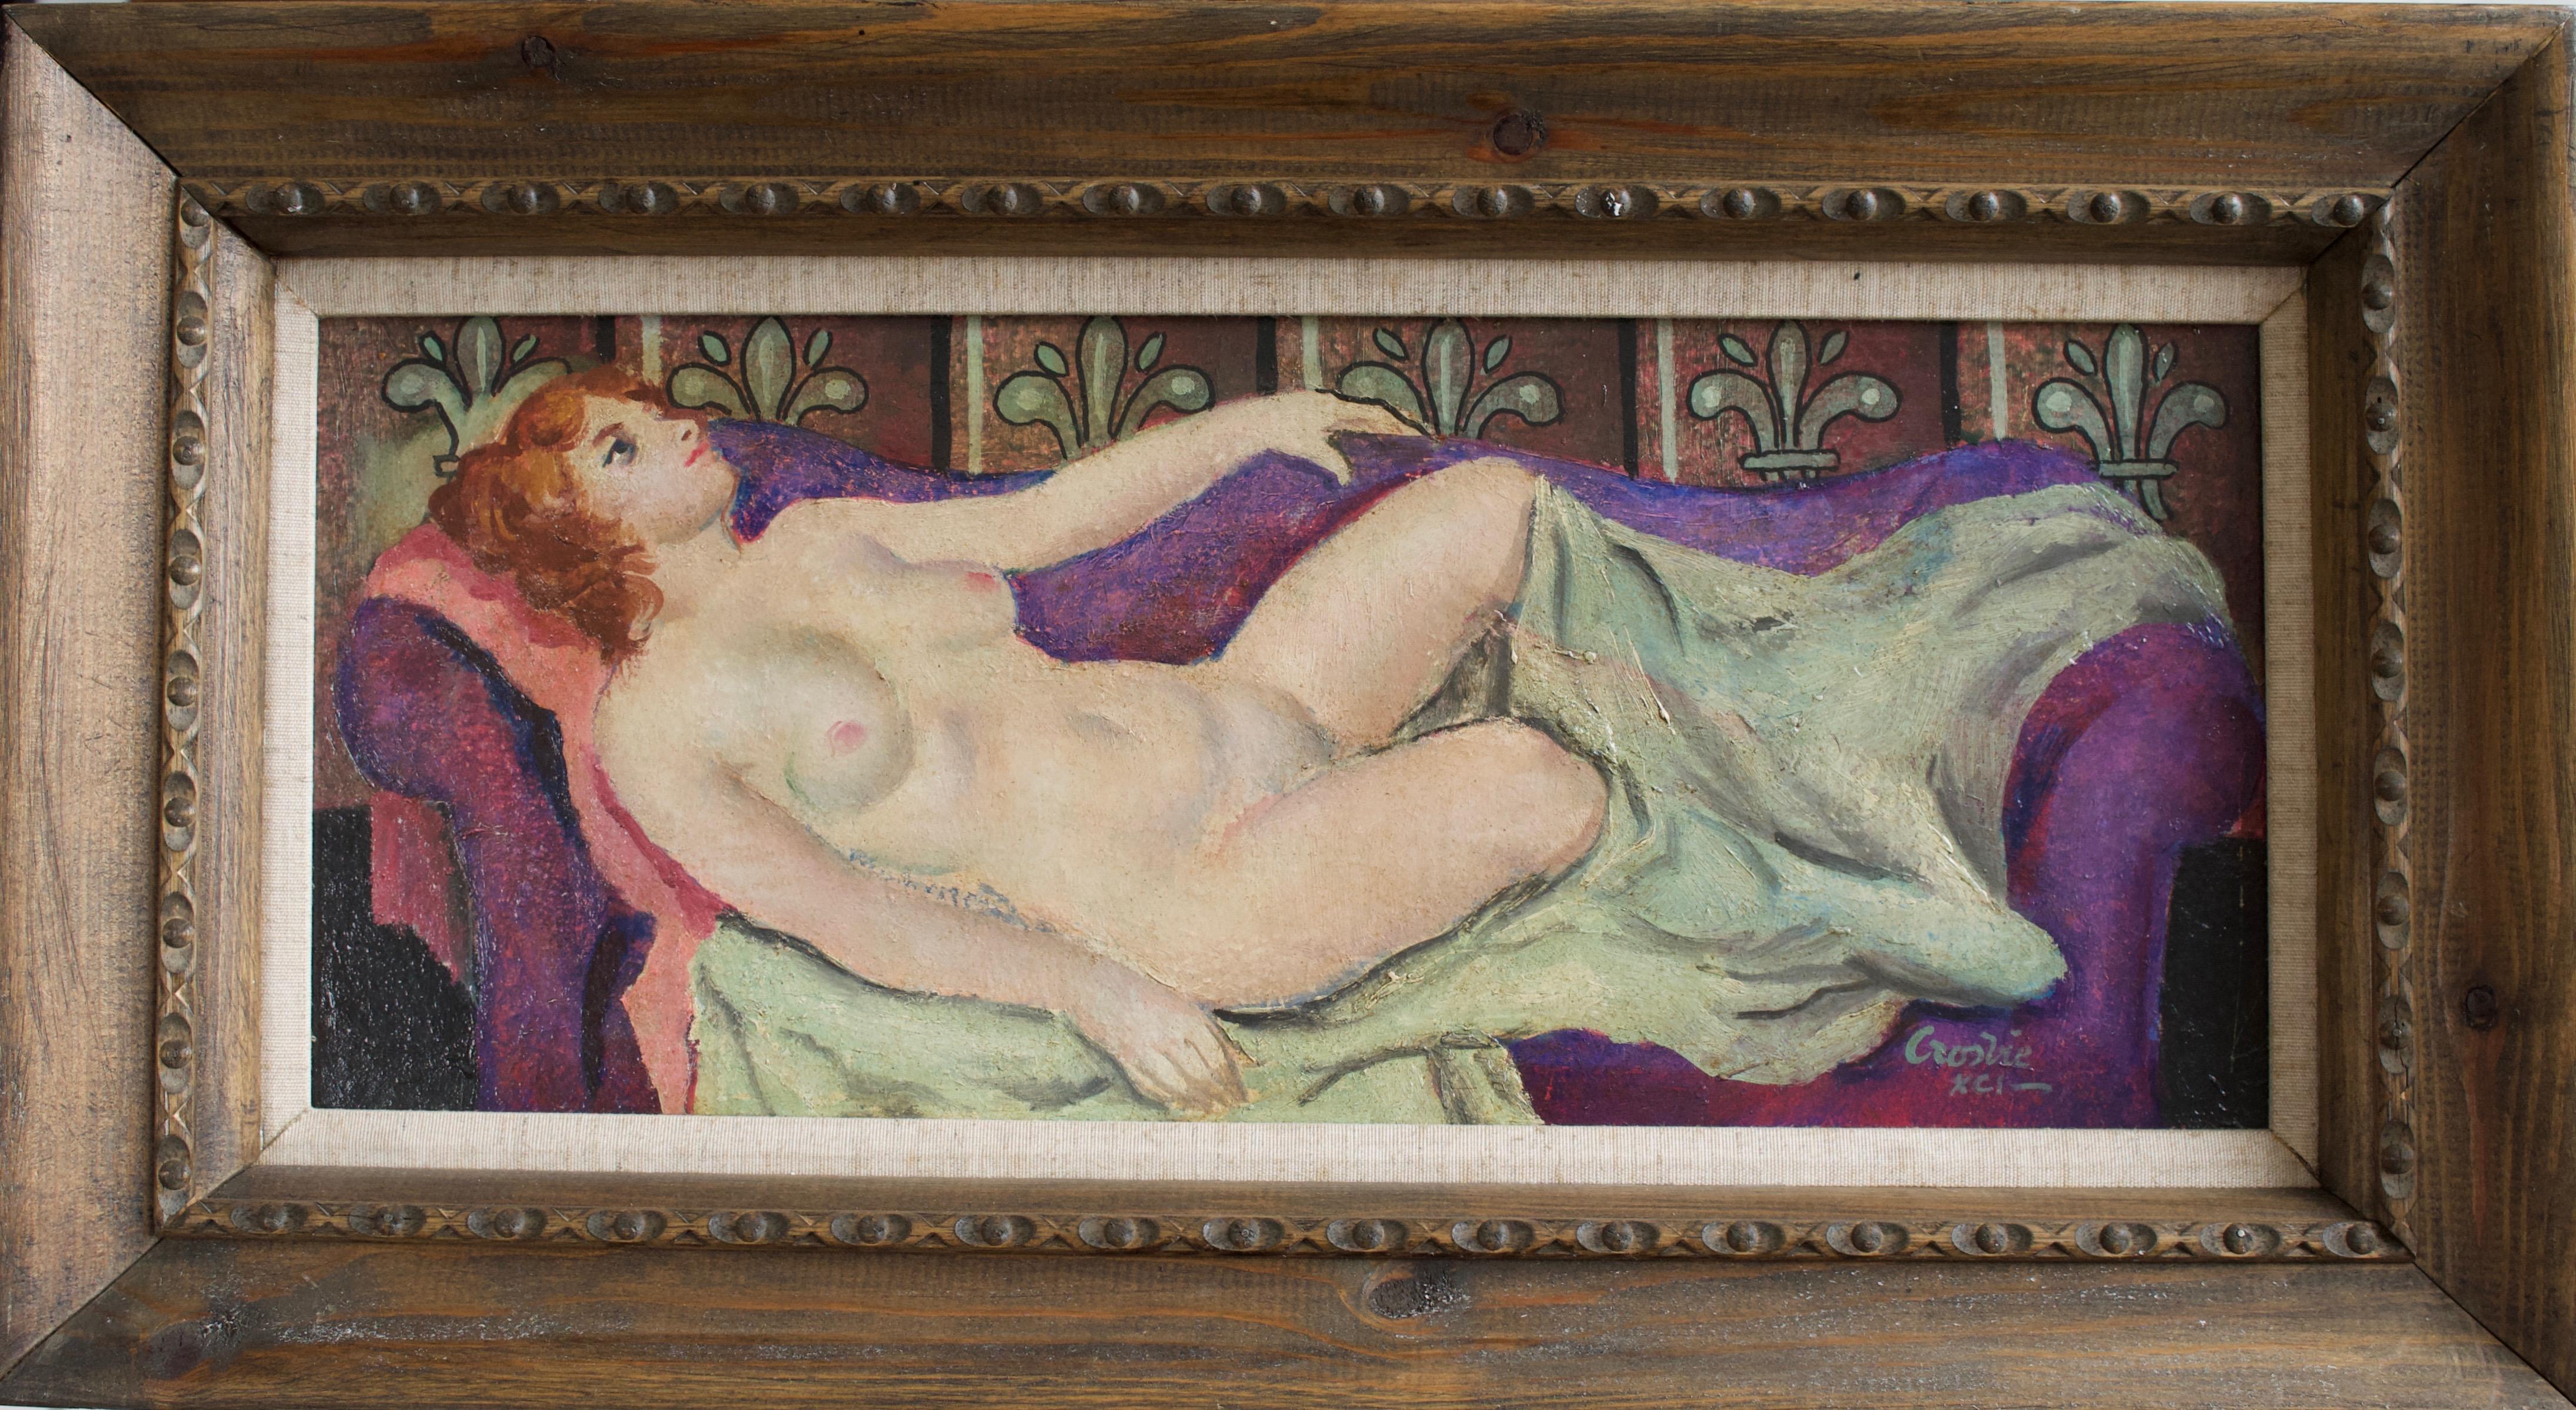 A very stylish image of a reclining nude in an elegant interior. Beautiful palette.

William Crosbie (1915-1999)
Reclining nude
Signed and dated "XCI" (91)
Oil on board
8½ x 20 inches without frame
13½ x 25 inches with frame.

Painter, draughtsman